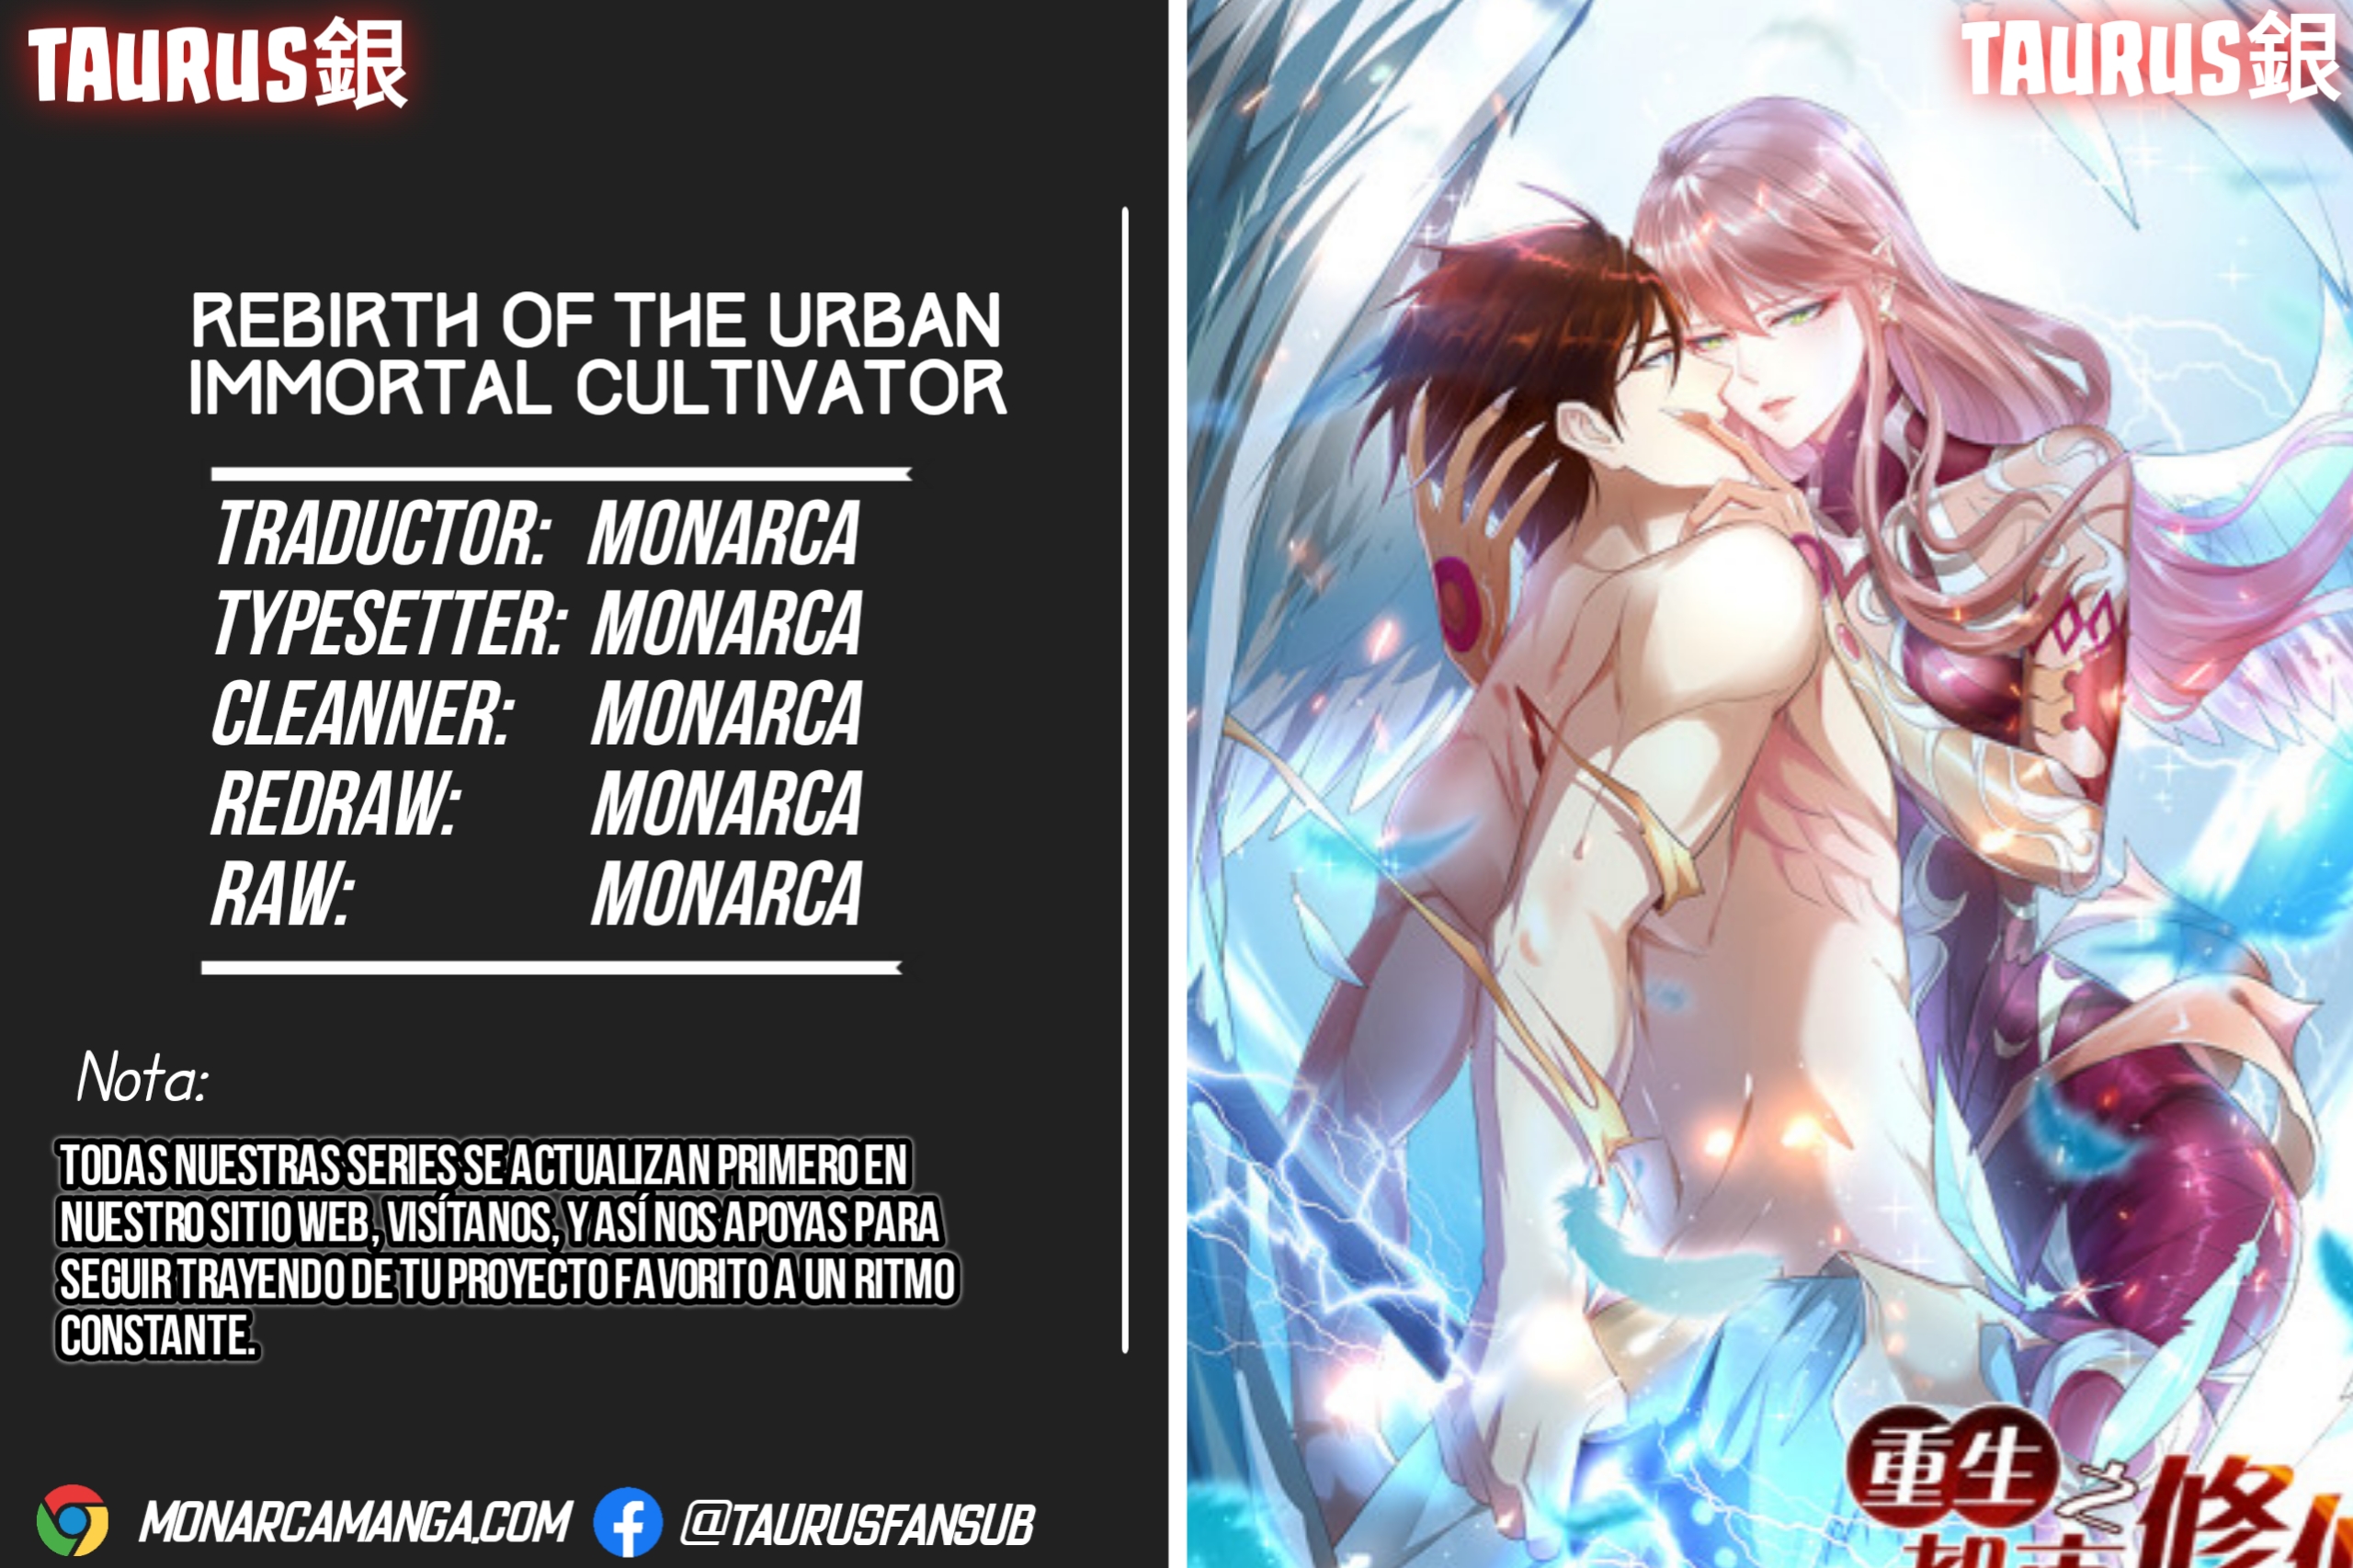 Manga Rebirth Of The Urban Immortal Cultivator Chapter 721 image number 4